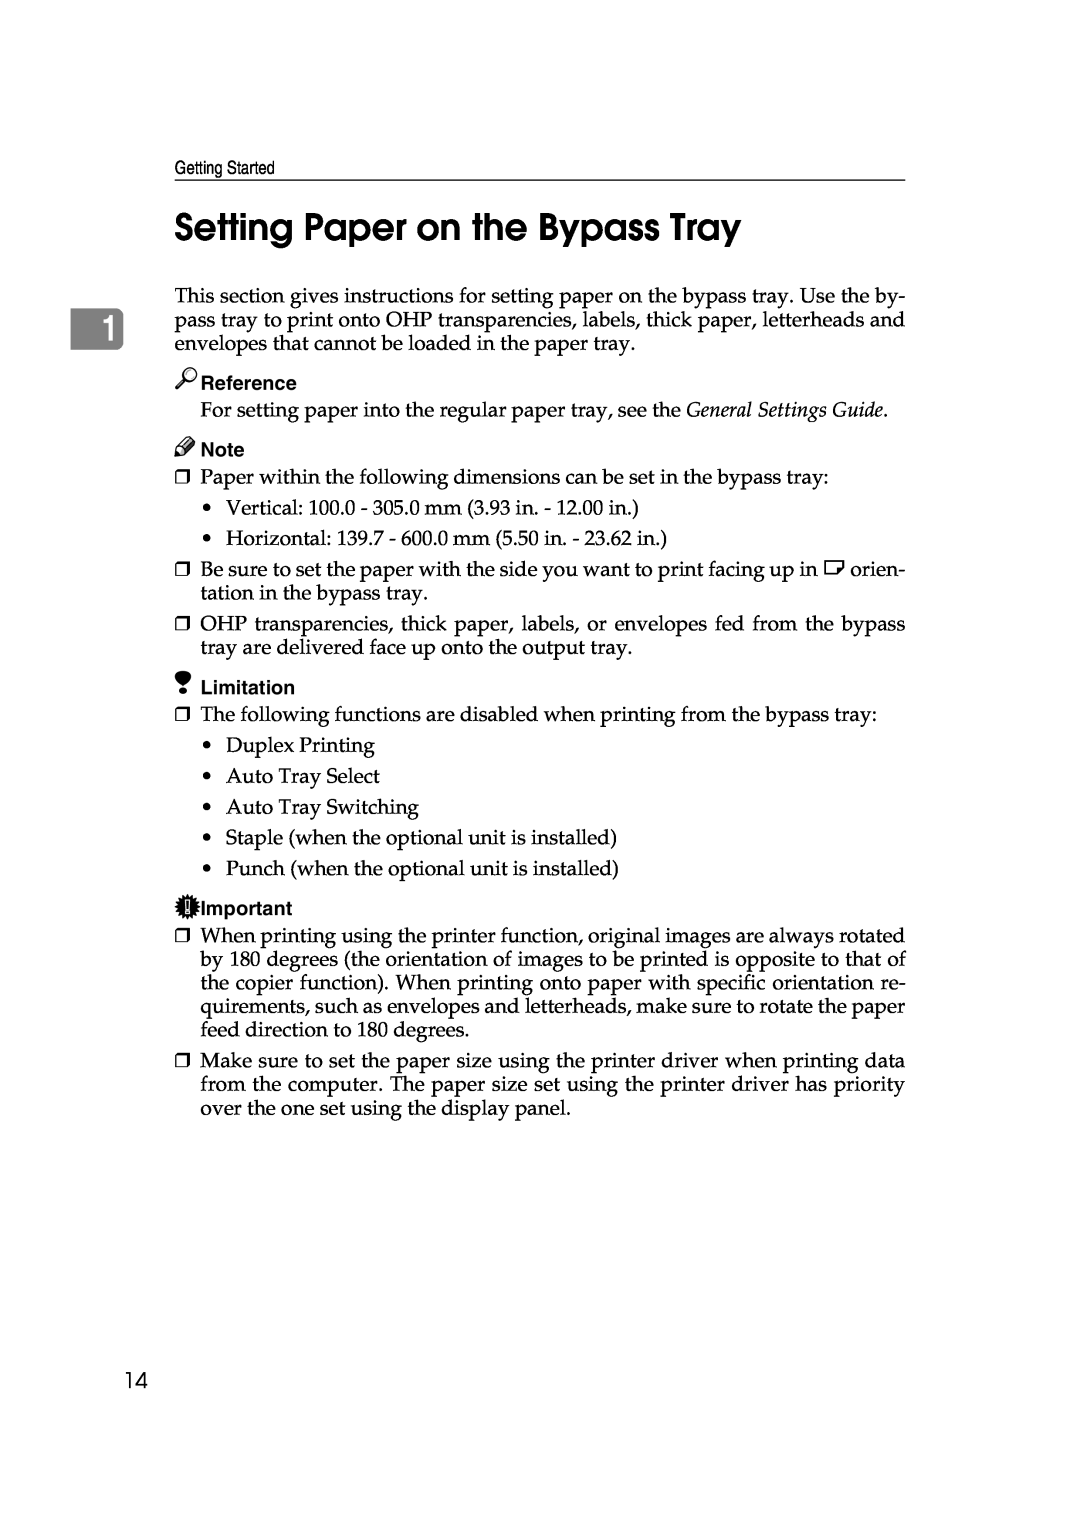 Xerox 1075 manual Setting Paper on the Bypass Tray, Reference, Limitation 